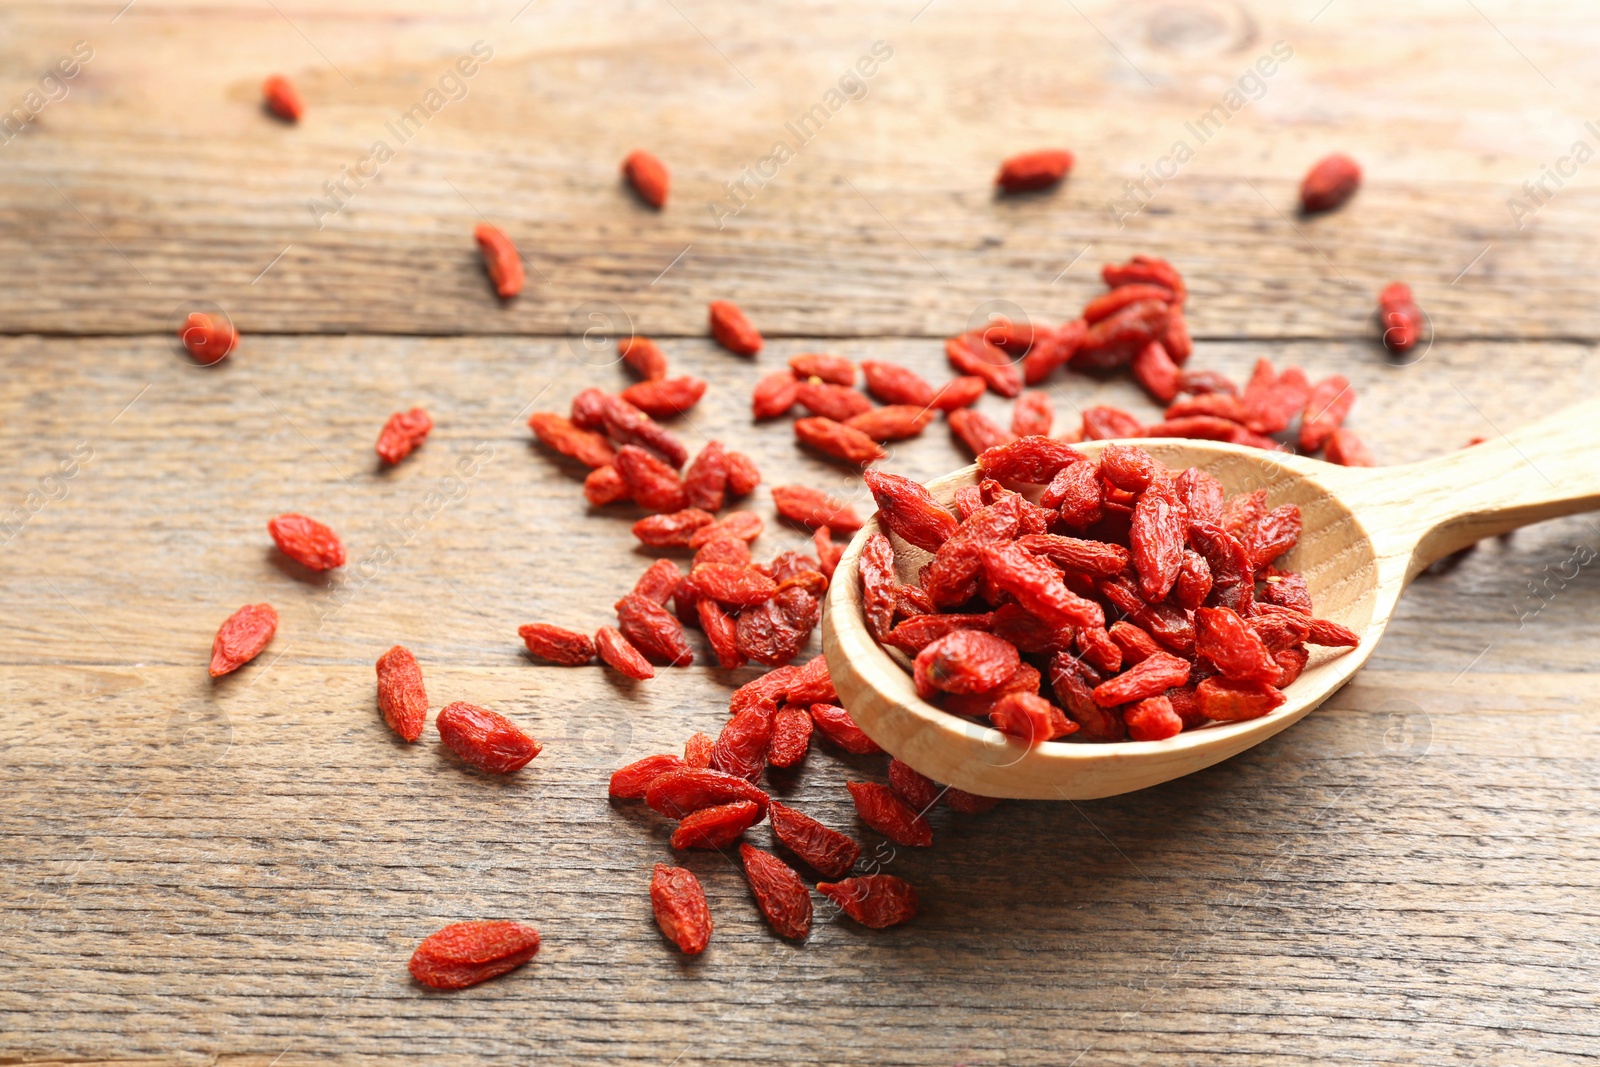 Photo of Spoon and dried goji berries on wooden table, closeup. Healthy superfood